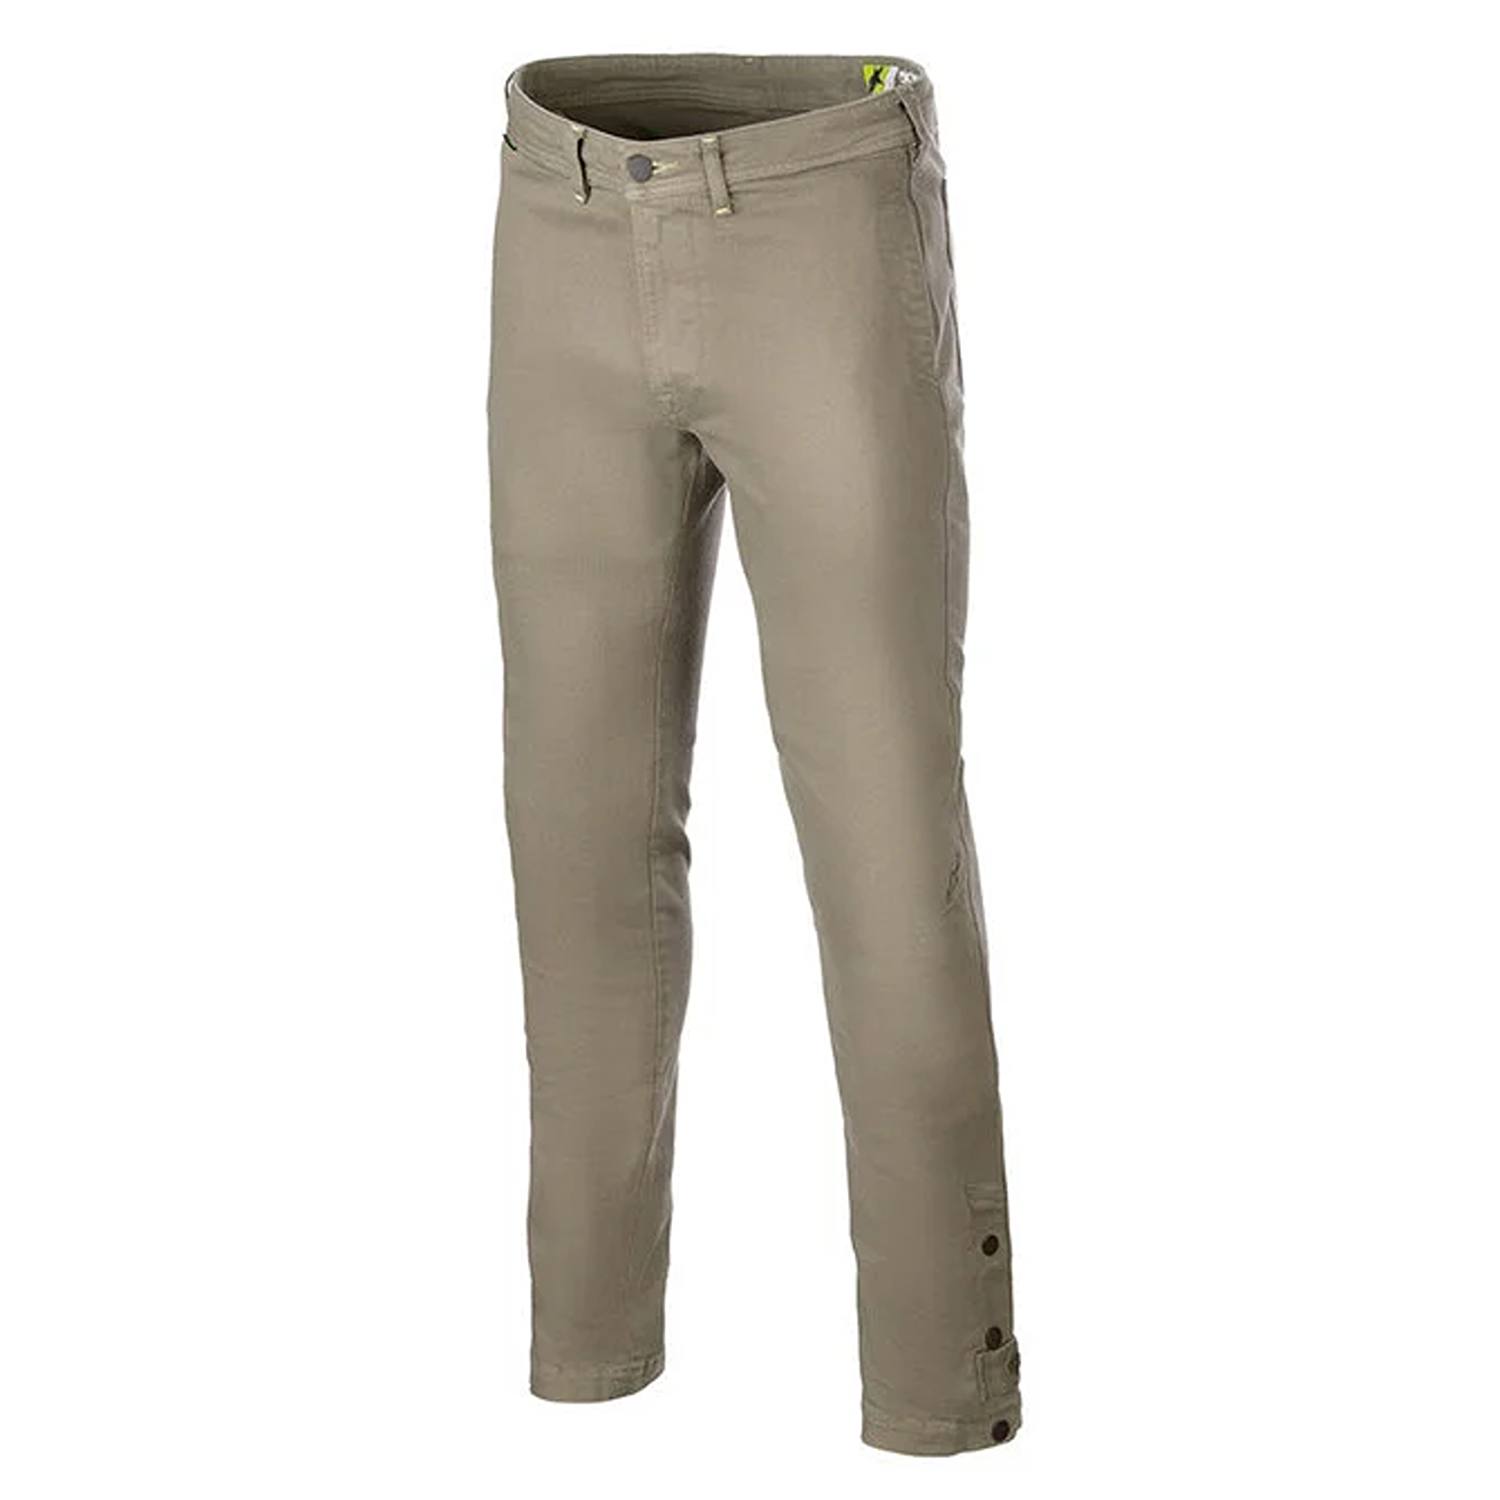 Image of Alpinestars Stratos Regular Fit Tech Riding Pants Military Green Taille 36